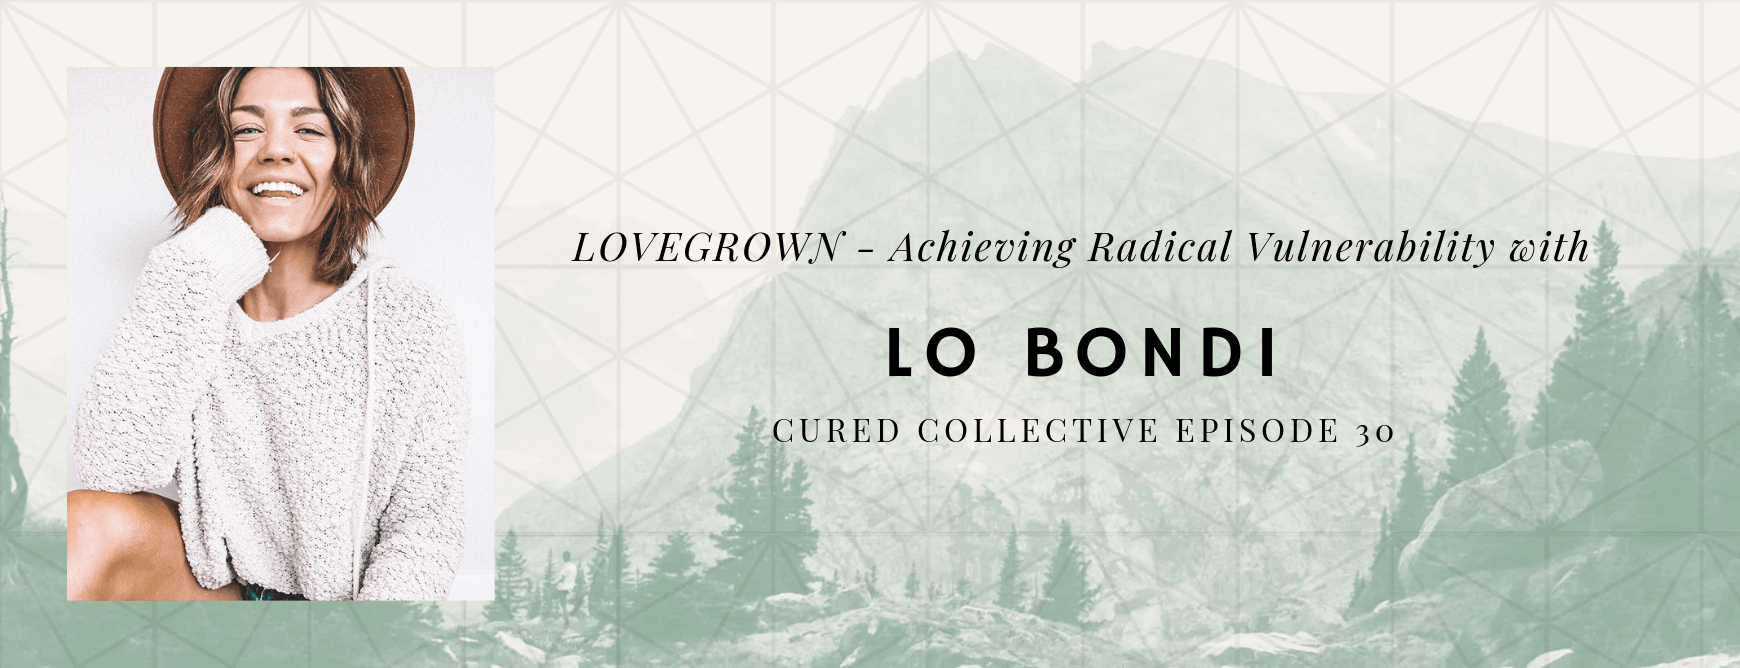 Lo Bondi joins the Cured Collective Podcast